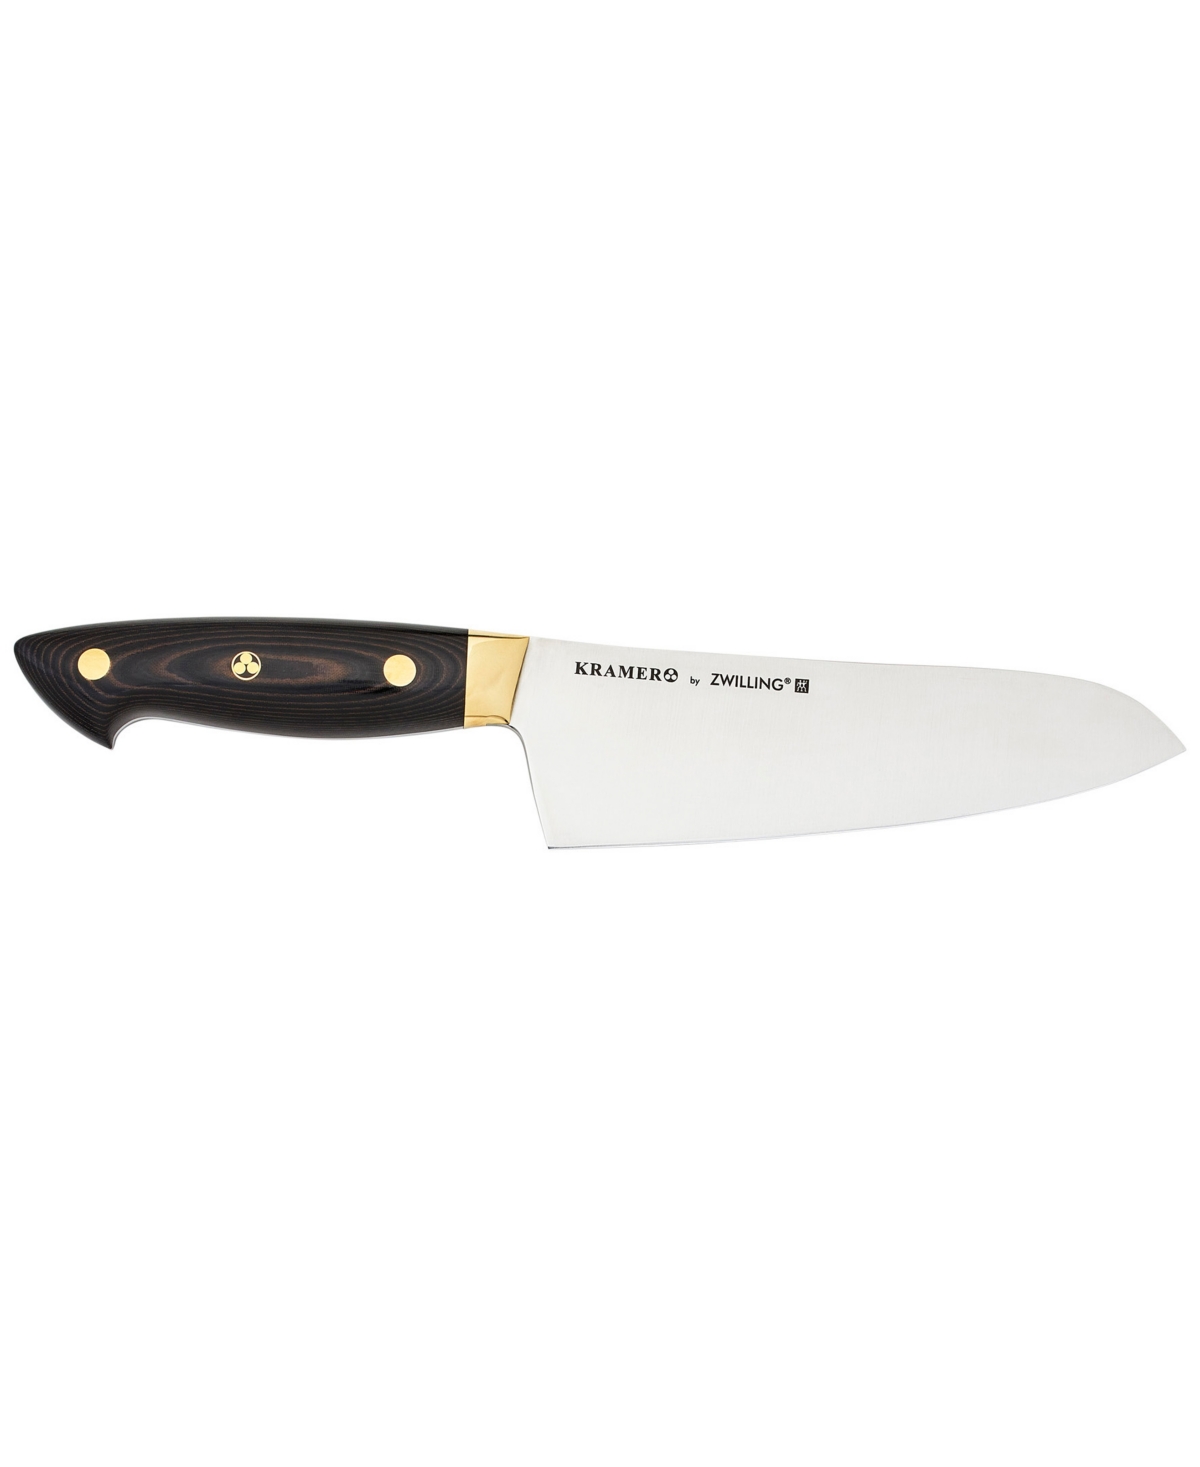 Zwilling Bob Kramer Carbon 2.0 Santoku Knife, 7" In Brown And Silver-tone